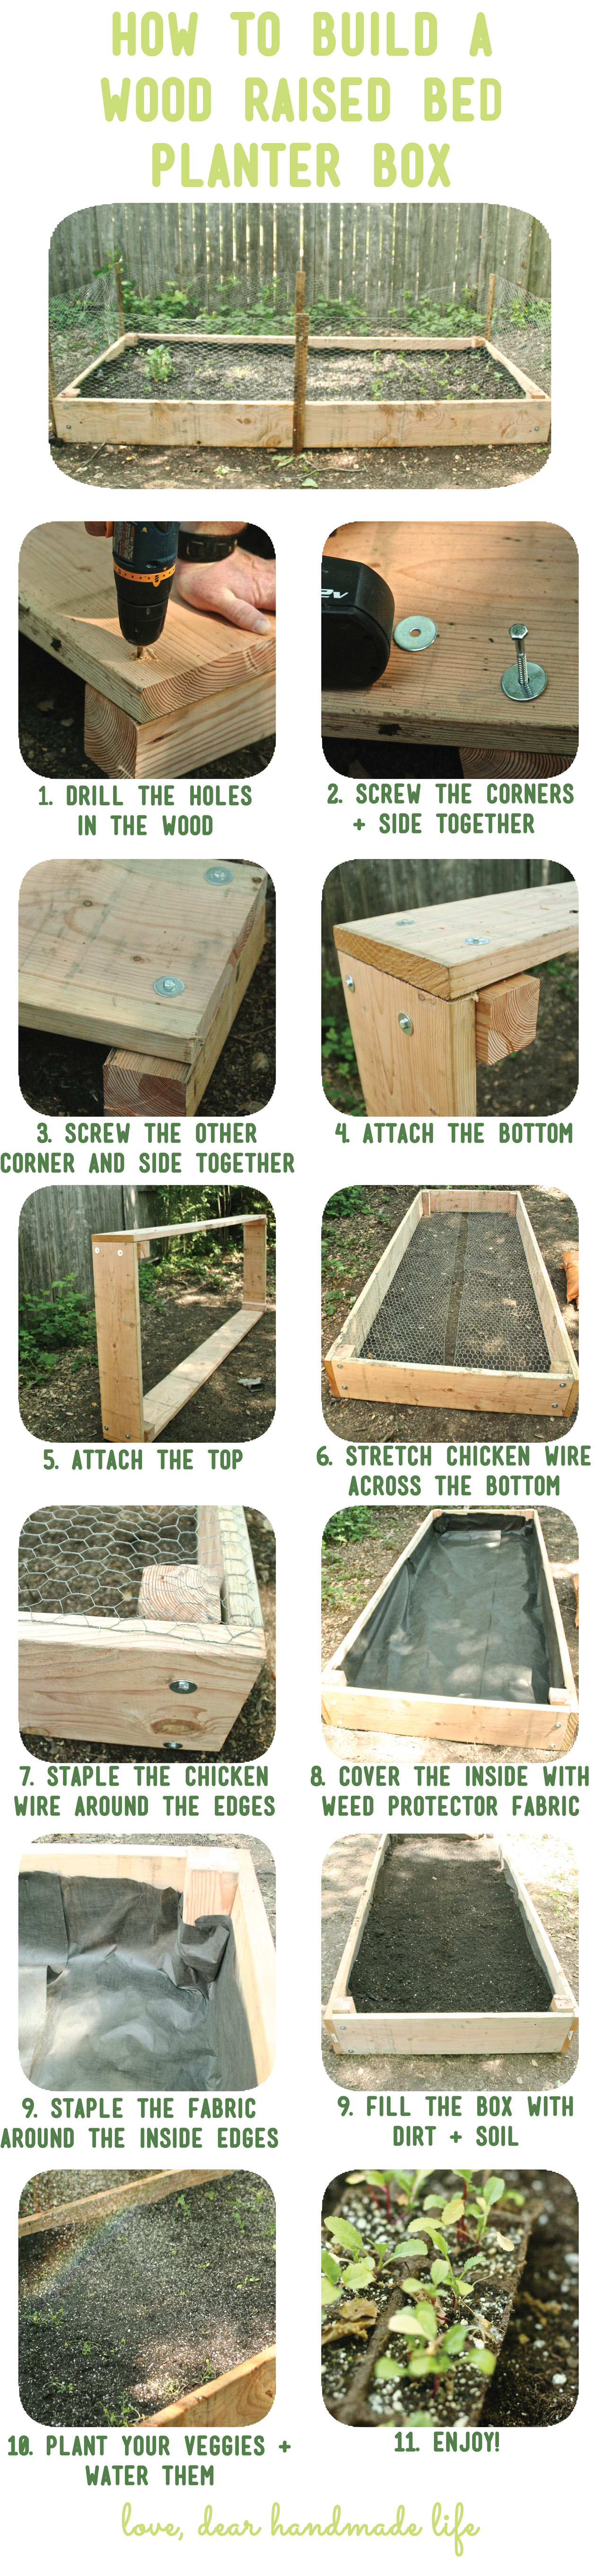 1-how-to-build-a-raised-bed-planter-box-wood-dear-handmade-life